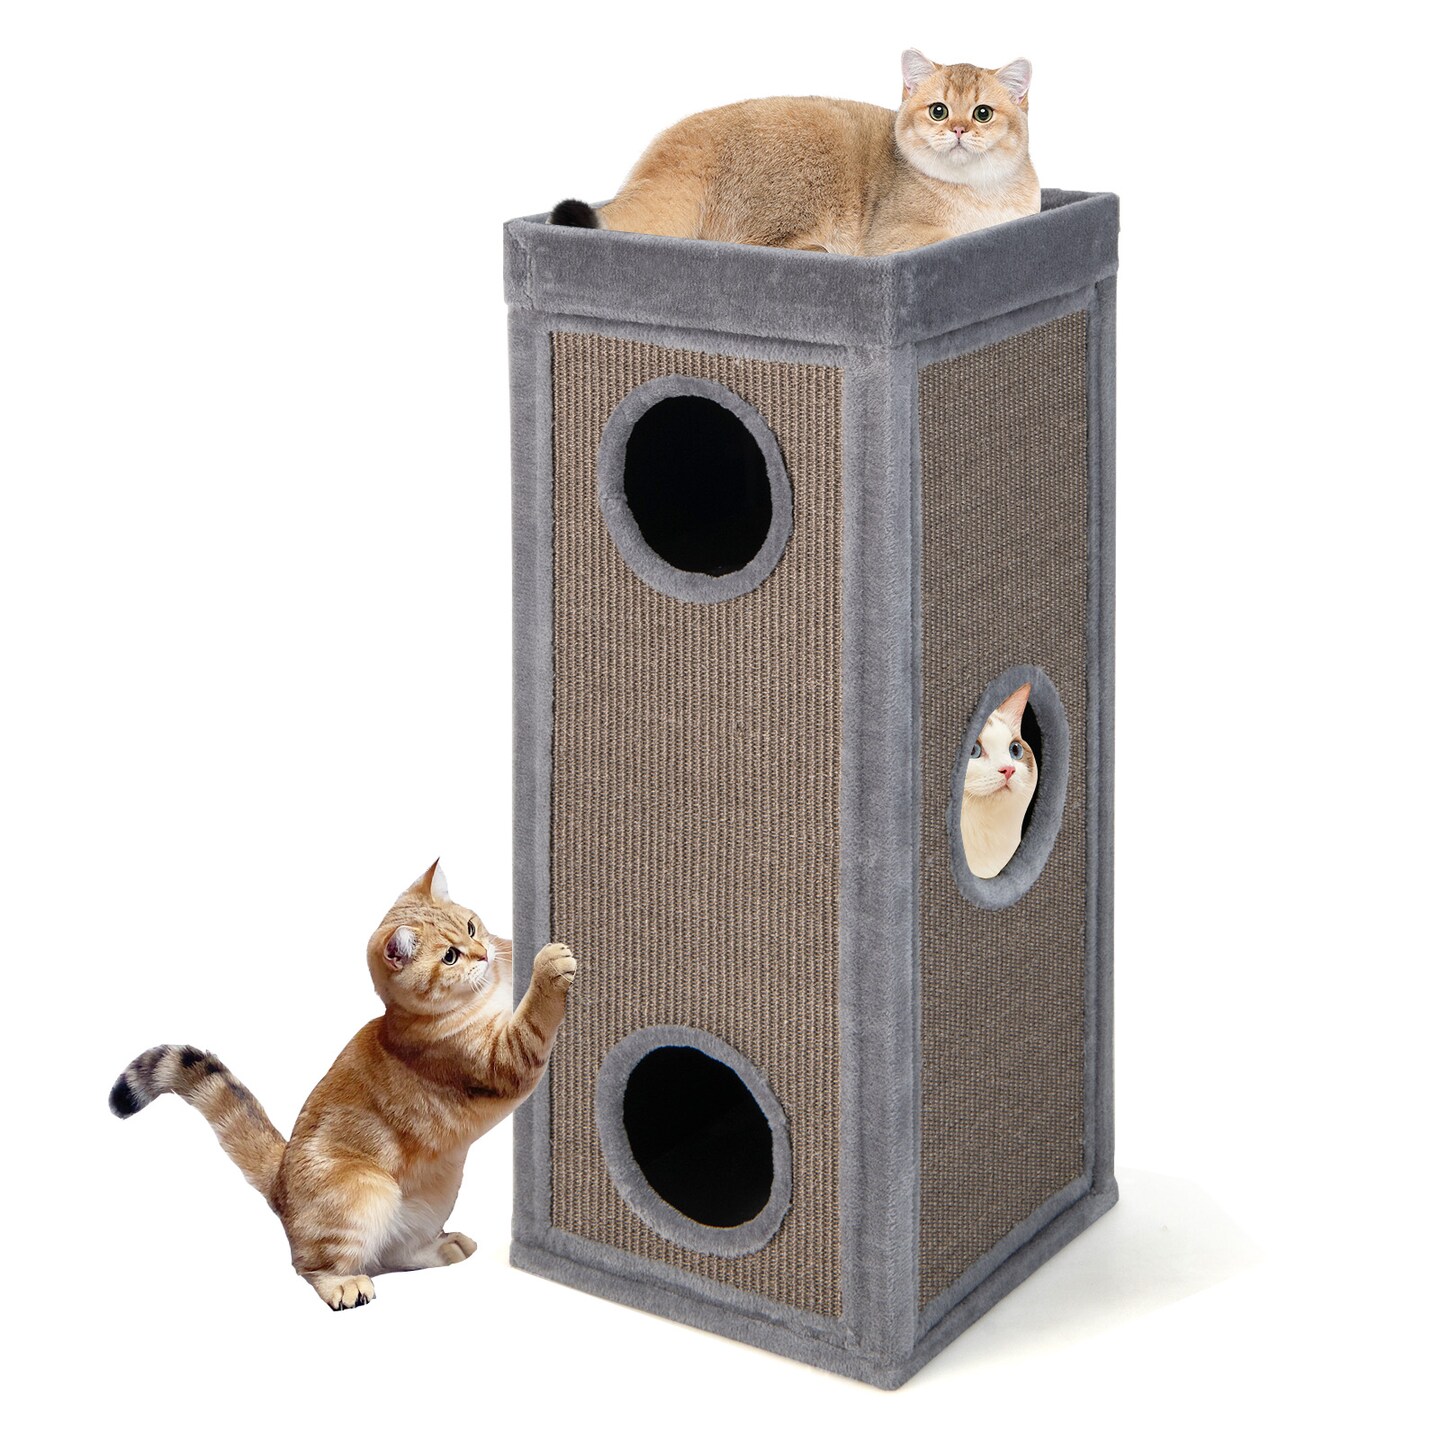 Costway 4-Story Cat House 39'' Cat Condo with Scratching Posts & 4 Soft Plush Cushions Gray/Natural